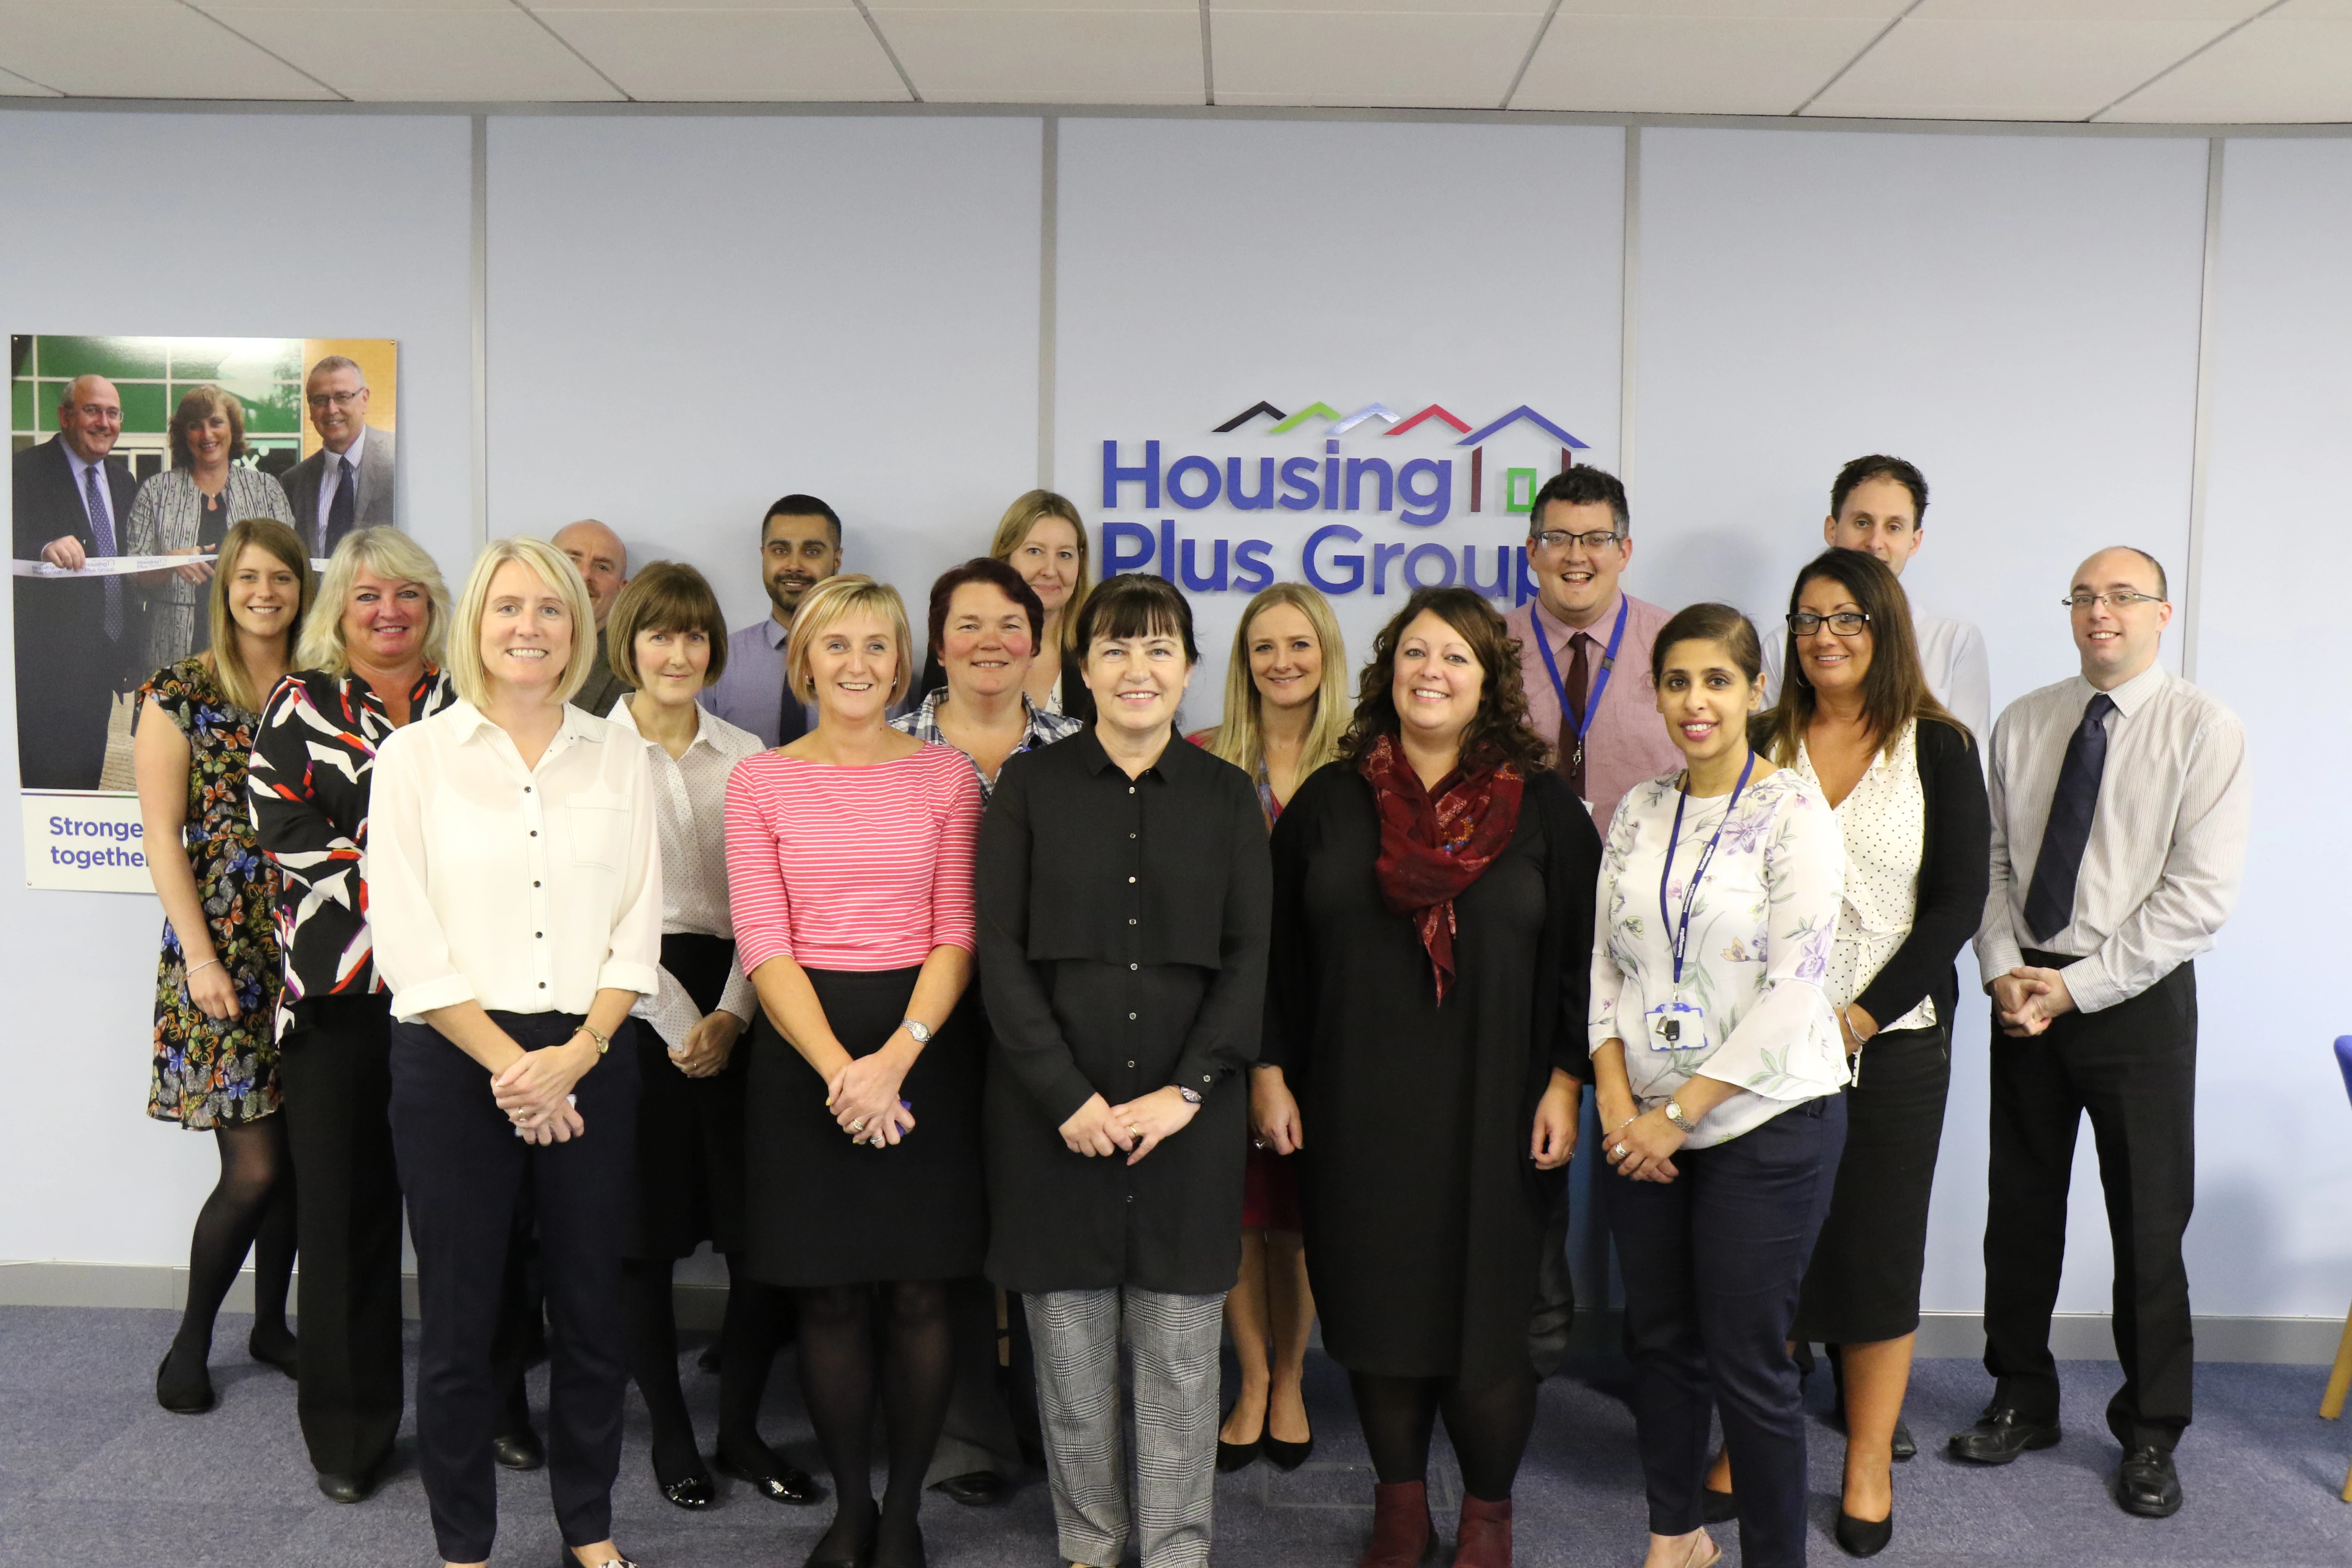 The shortlisted finance team of Housing Plus Group 